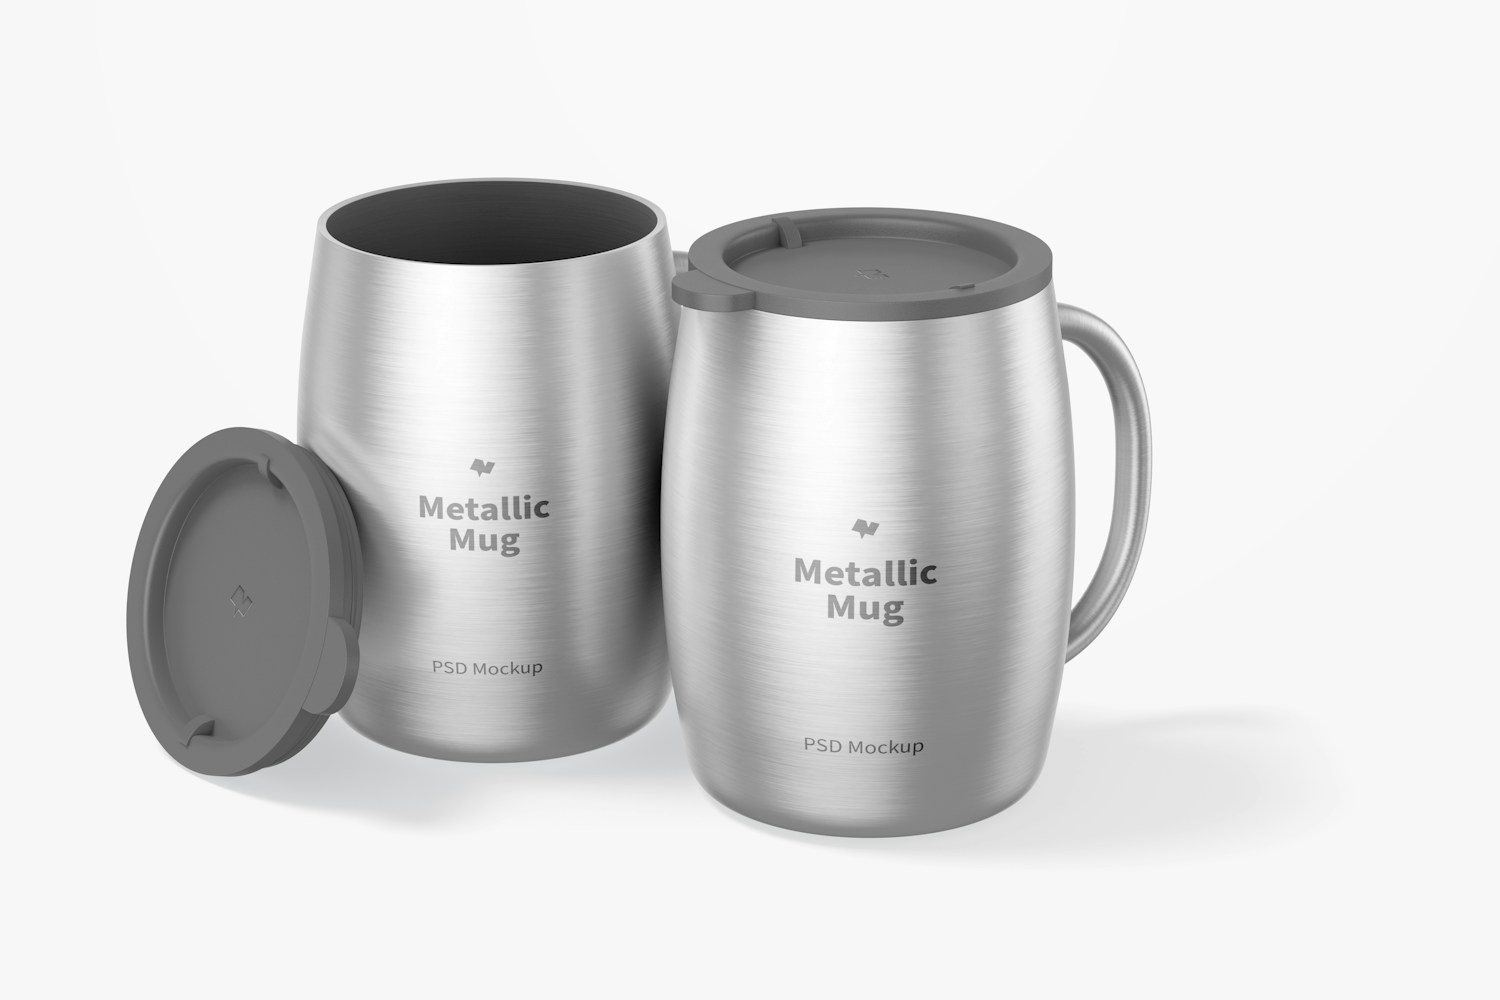 Metallic Mugs with Lid Mockup, Opened and Closed